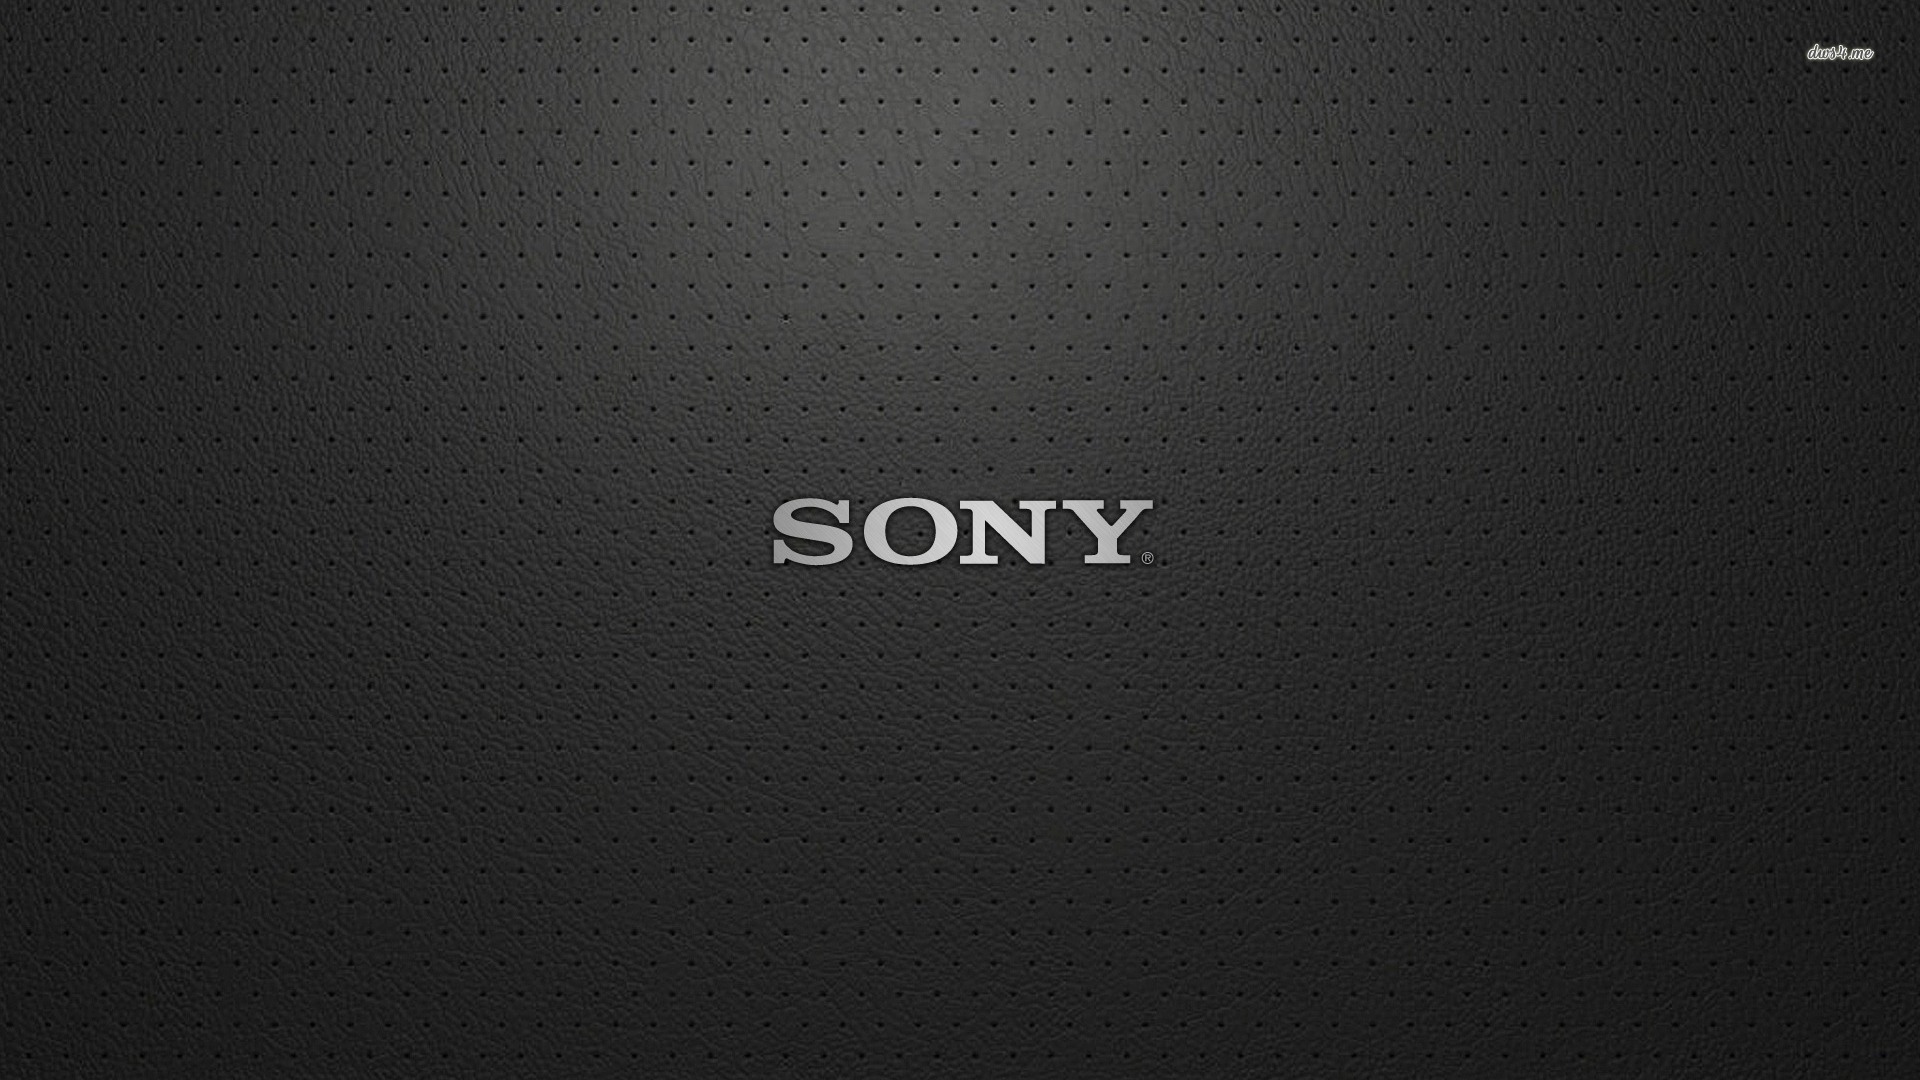 Free Download Sony Wallpapers Hd 2812 19x1080 For Your Desktop Mobile Tablet Explore 50 Vaio Wallpaper 19x1080 Sony Wallpapers 19x1080 Sony Vaio Wallpaper Backgrounds